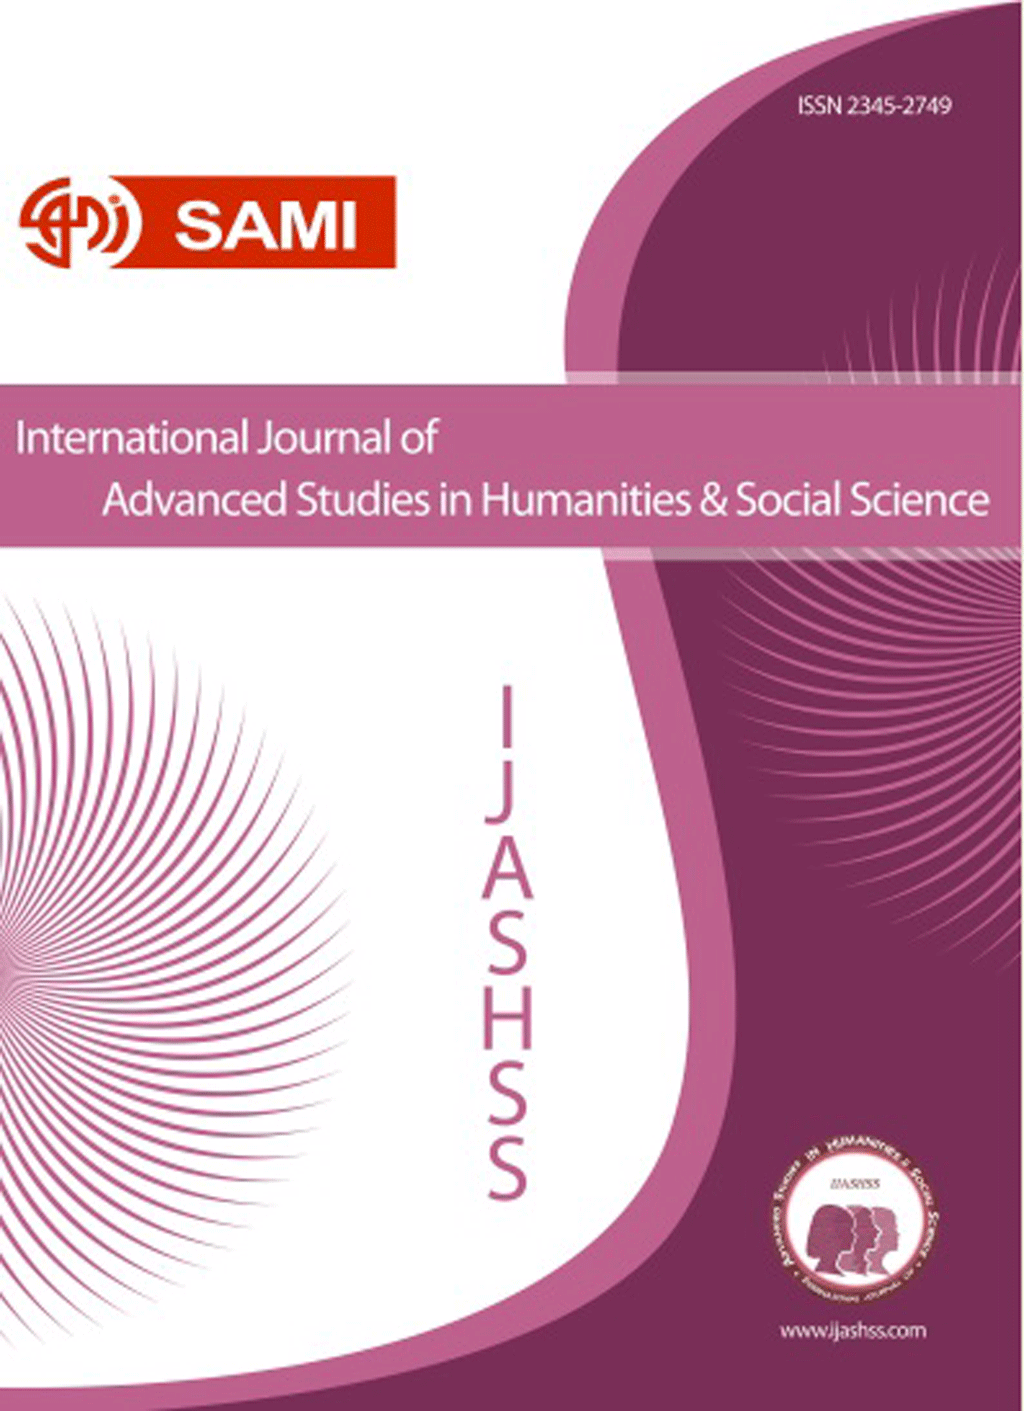 International Journal of Advanced Studies in Humanities and Social Science - July 2022, Volume 11 - Issue 3